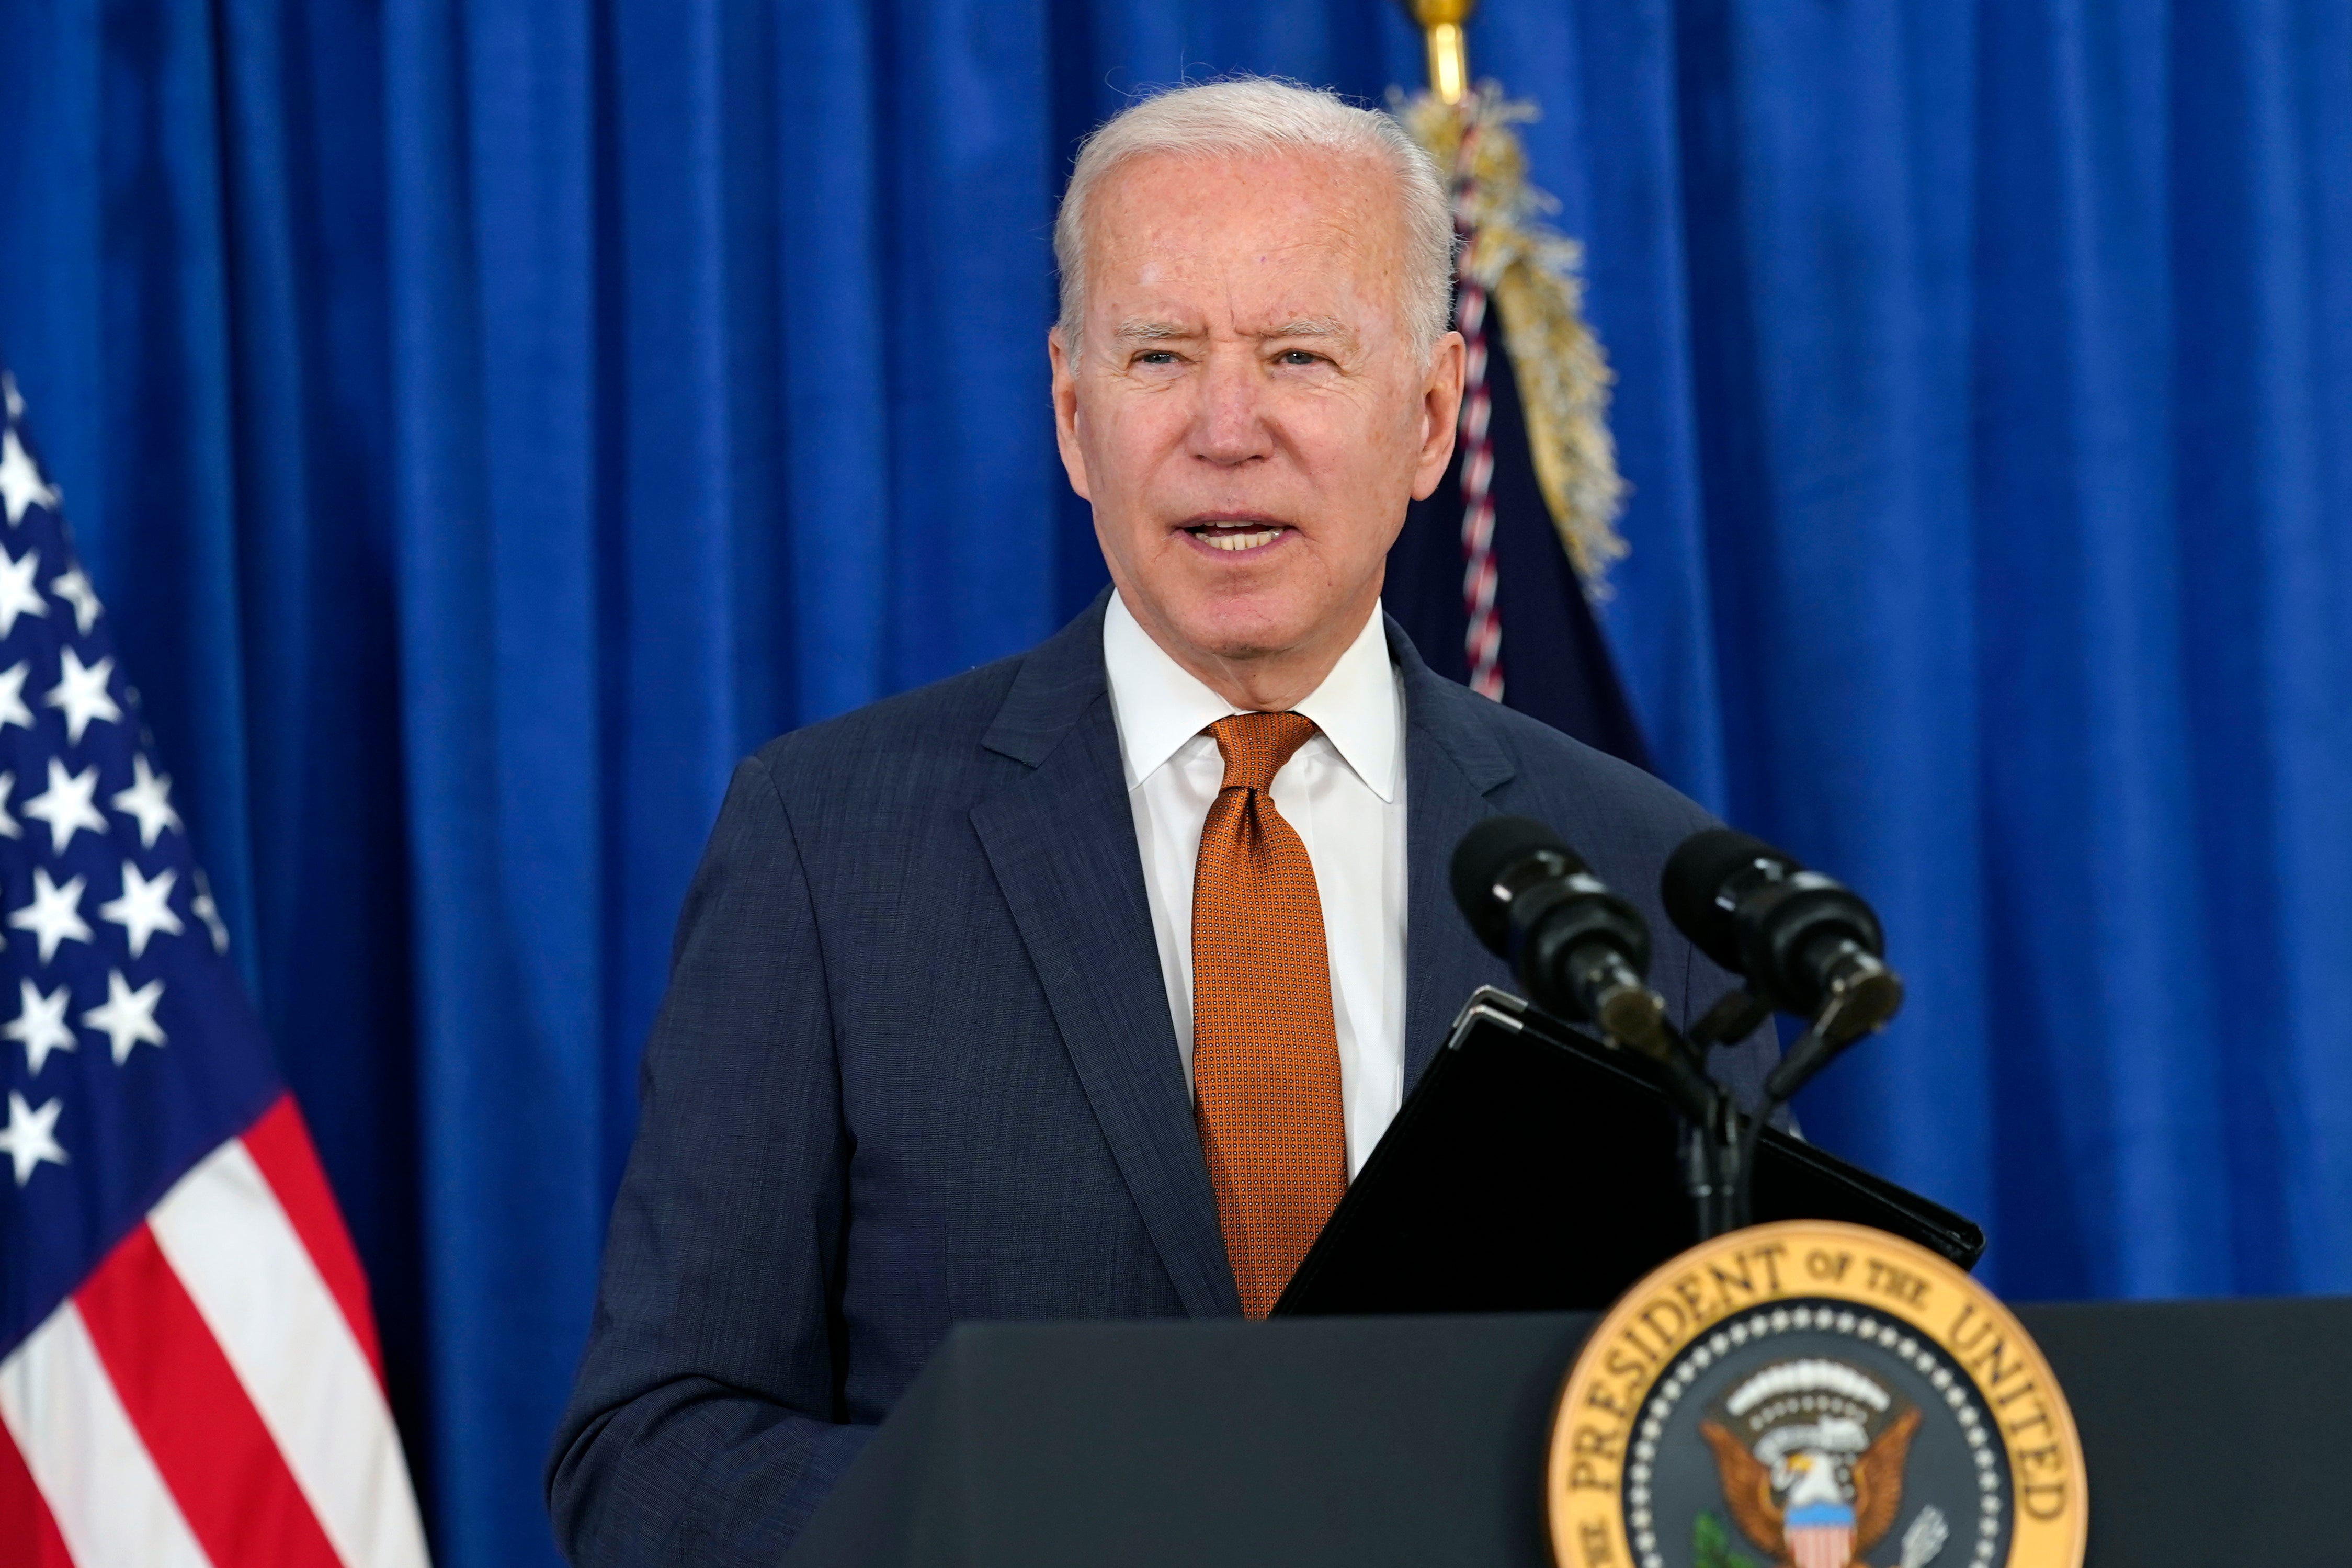 Biden may be a more sympathetic president, but threats to the NHS and British food and farming standards remain